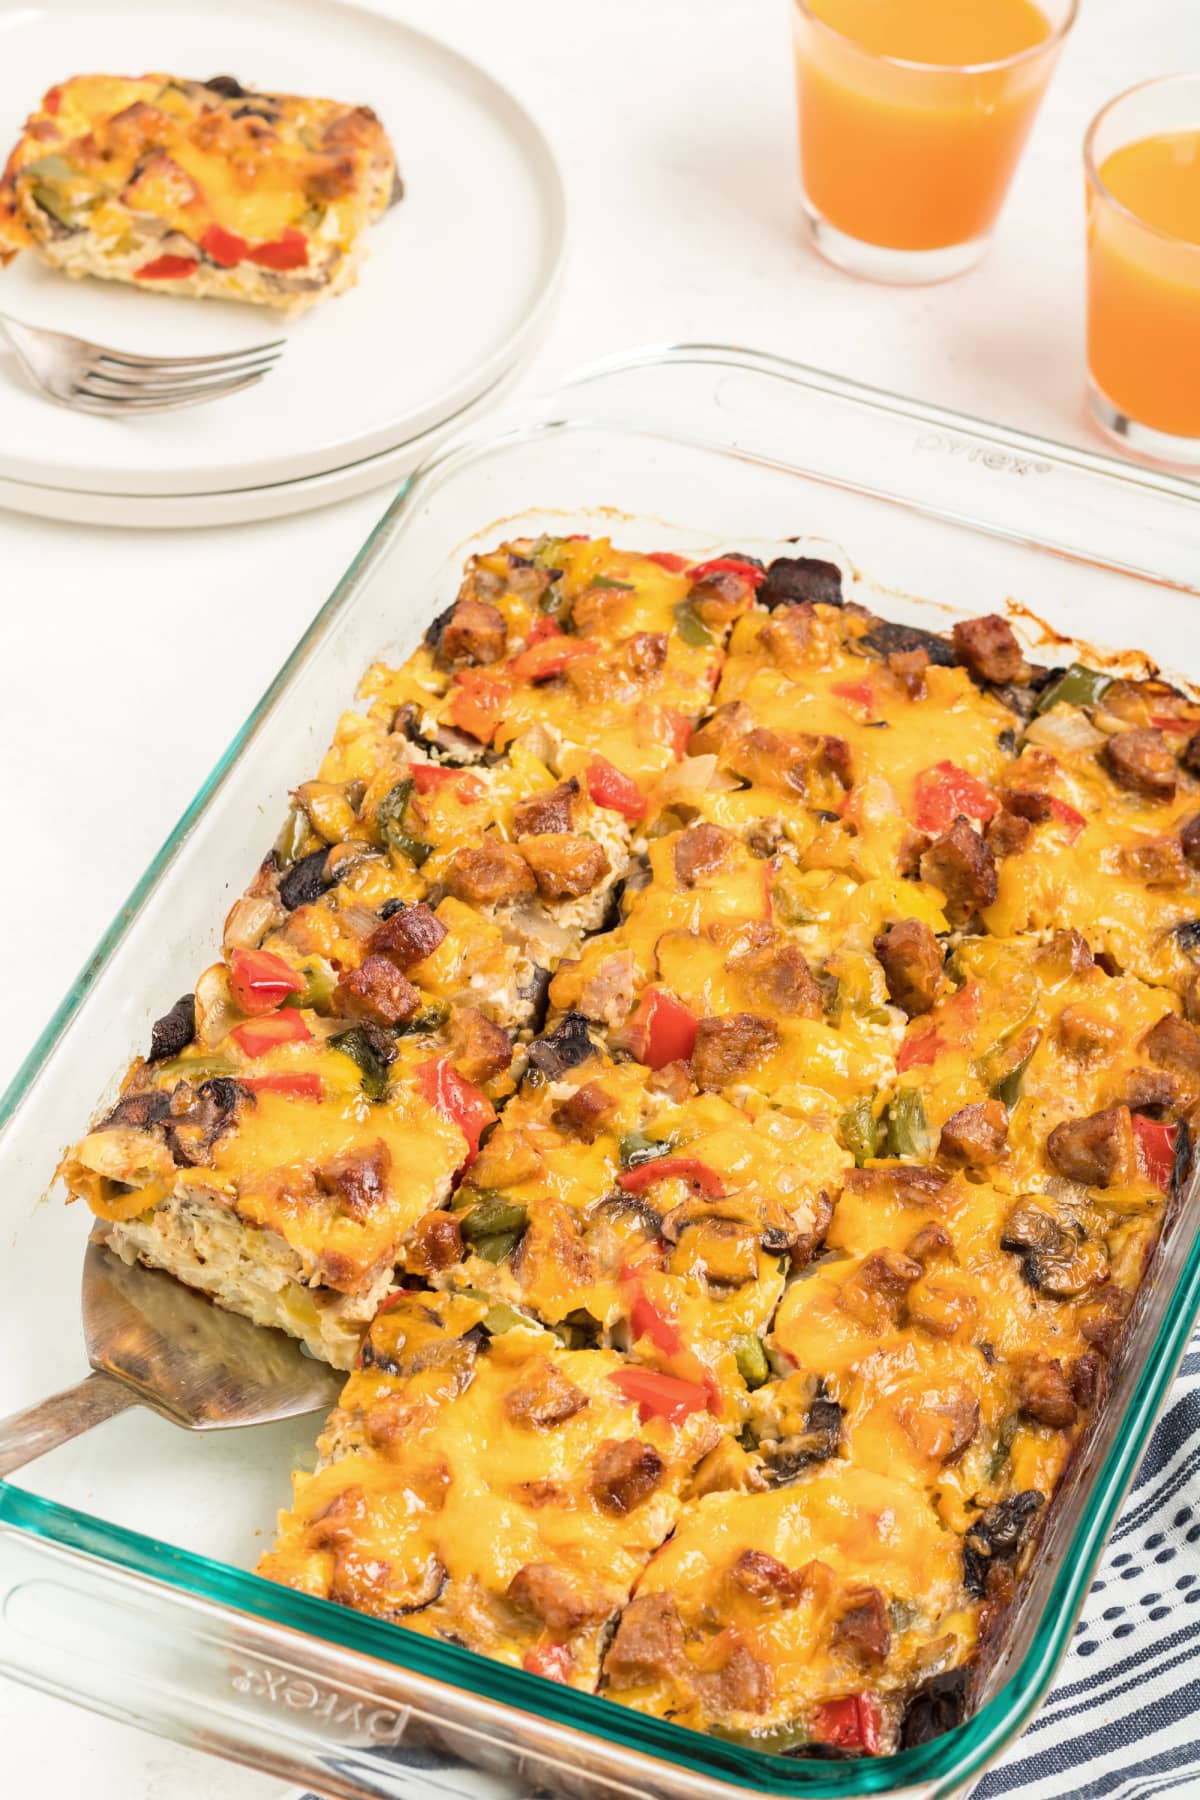 Sausage Egg And Cheese Breakfast Casserole cut into pieces